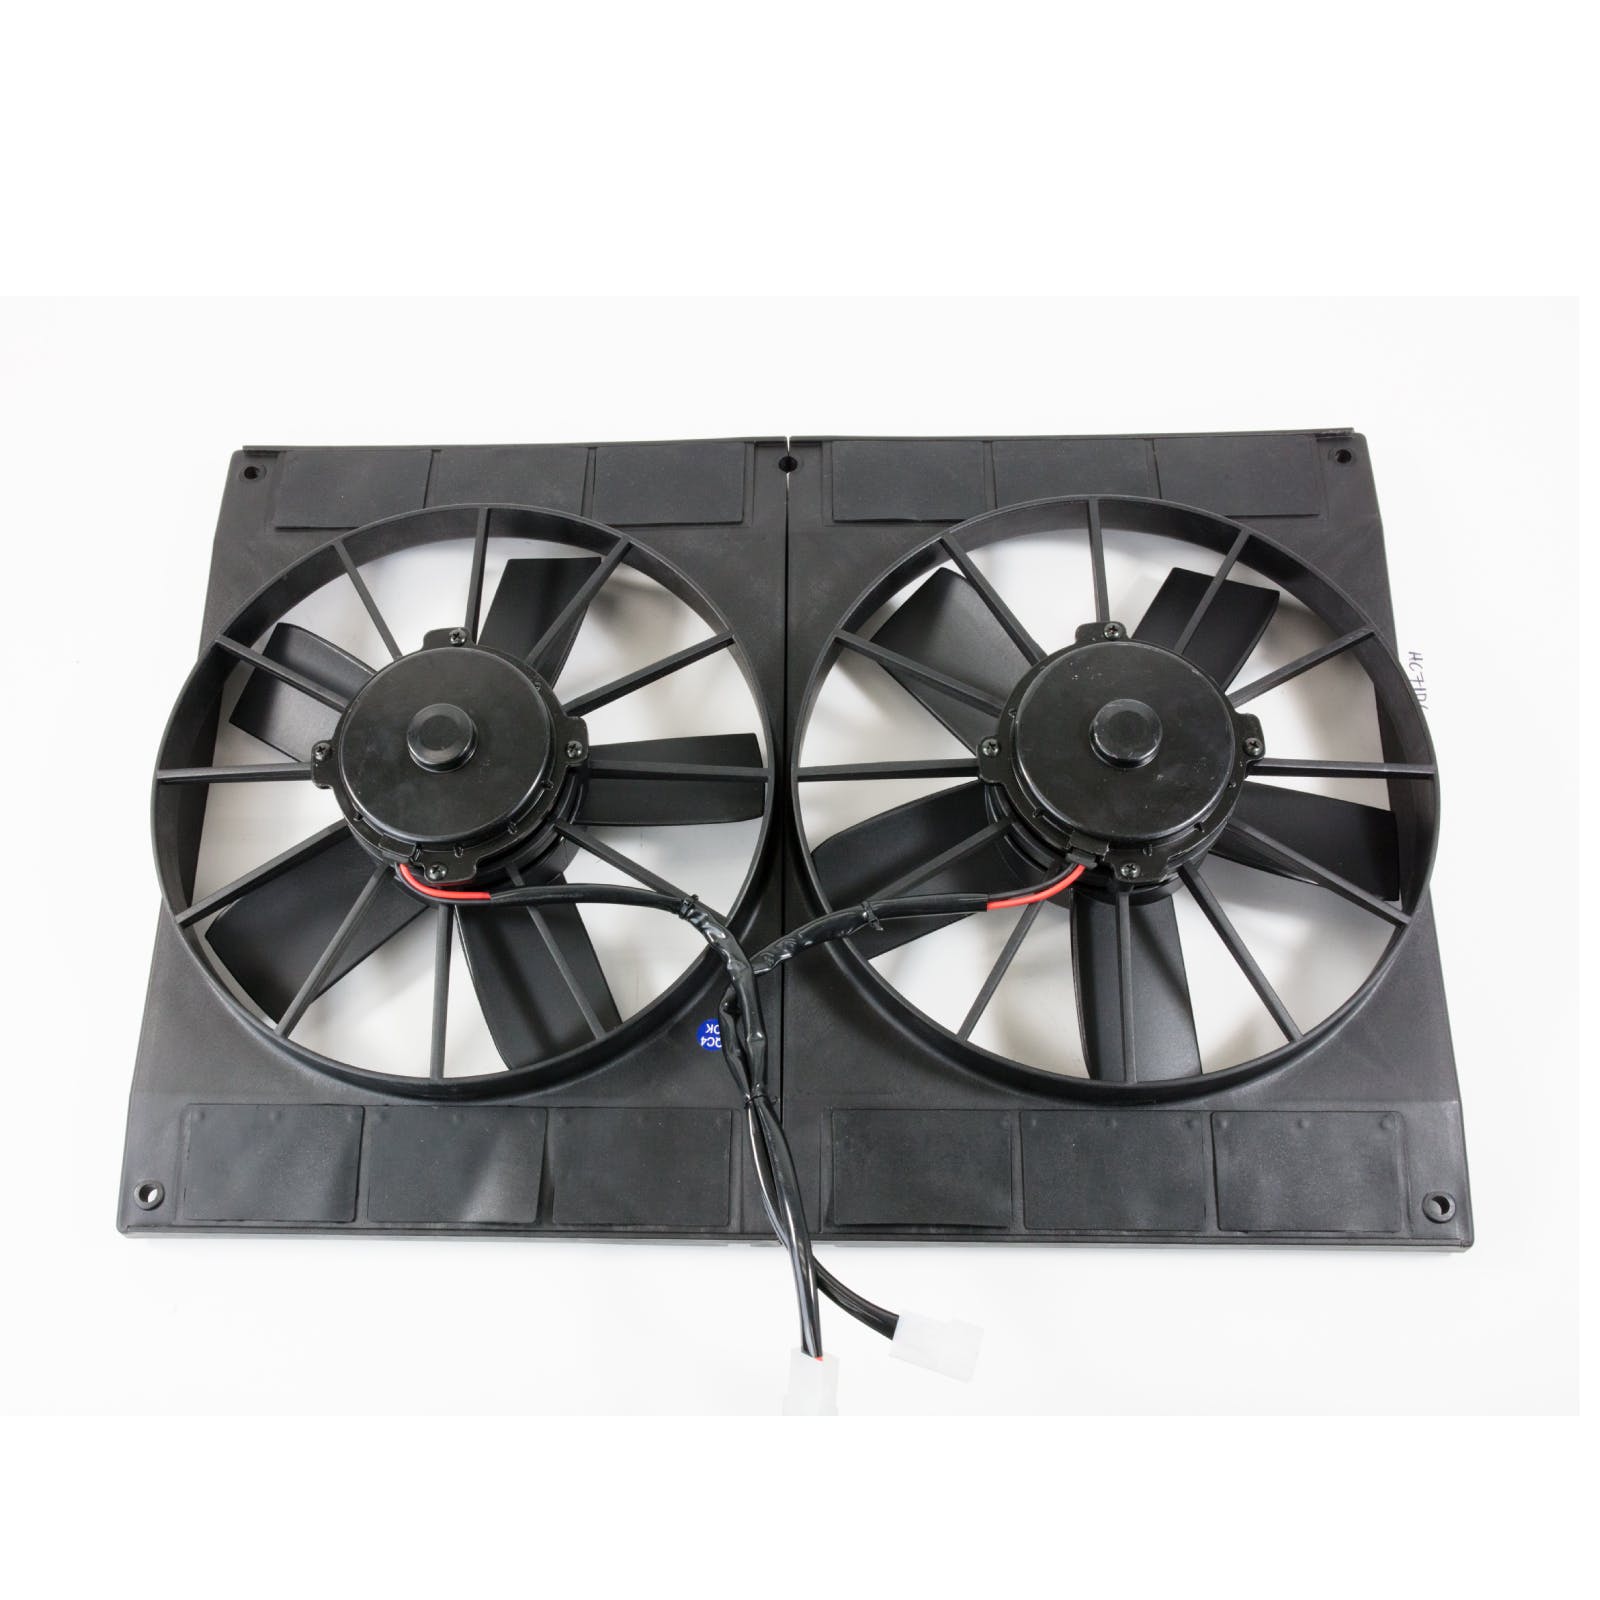 Top Street Performance HC7106 11 inch High Performance Dual Electric Cooling Fan, 25 AMP, S-Blade, Puller